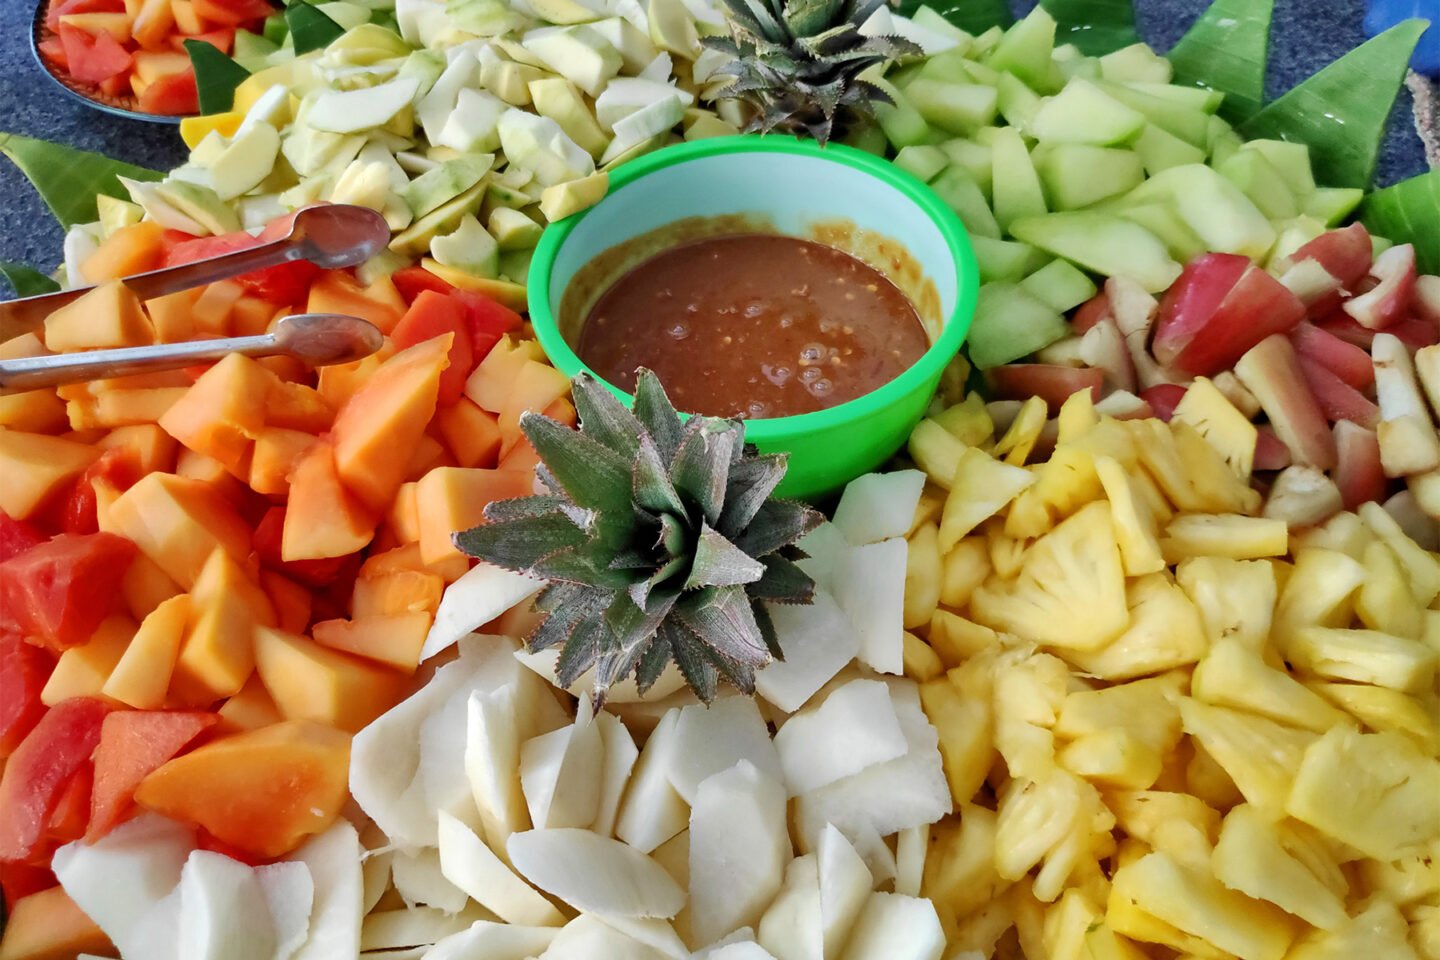 rujak fruit salad with sweet chili sauce